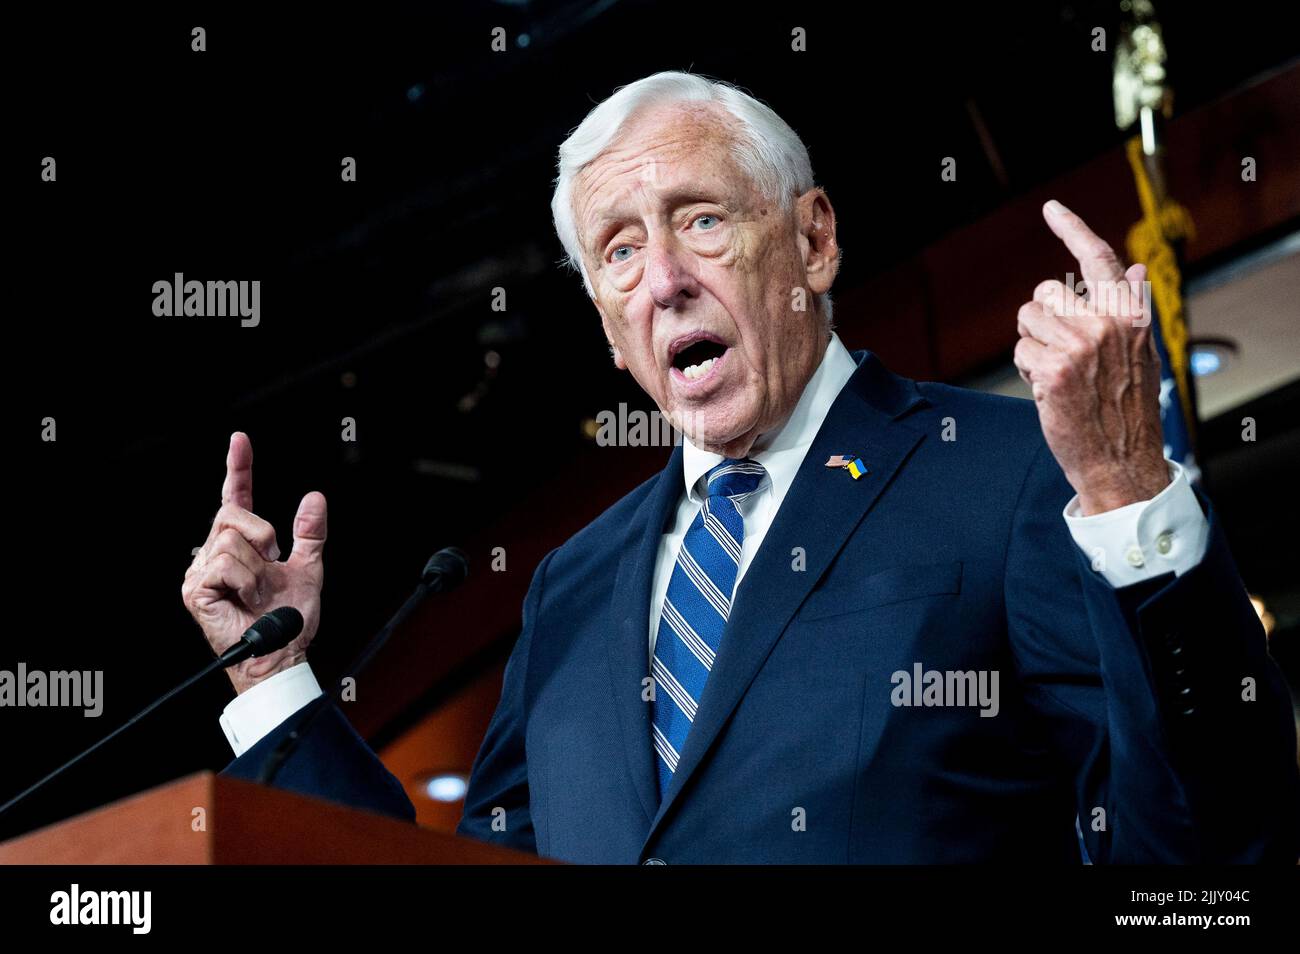 July 28, 2022, Washington, District of Columbia, United States: U.S. Representative STENY HOYER (D-MD) speaking at a press conference about the Wildfire Response and Drought Resiliency Act. (Credit Image: © Michael Brochstein/ZUMA Press Wire) Stock Photo